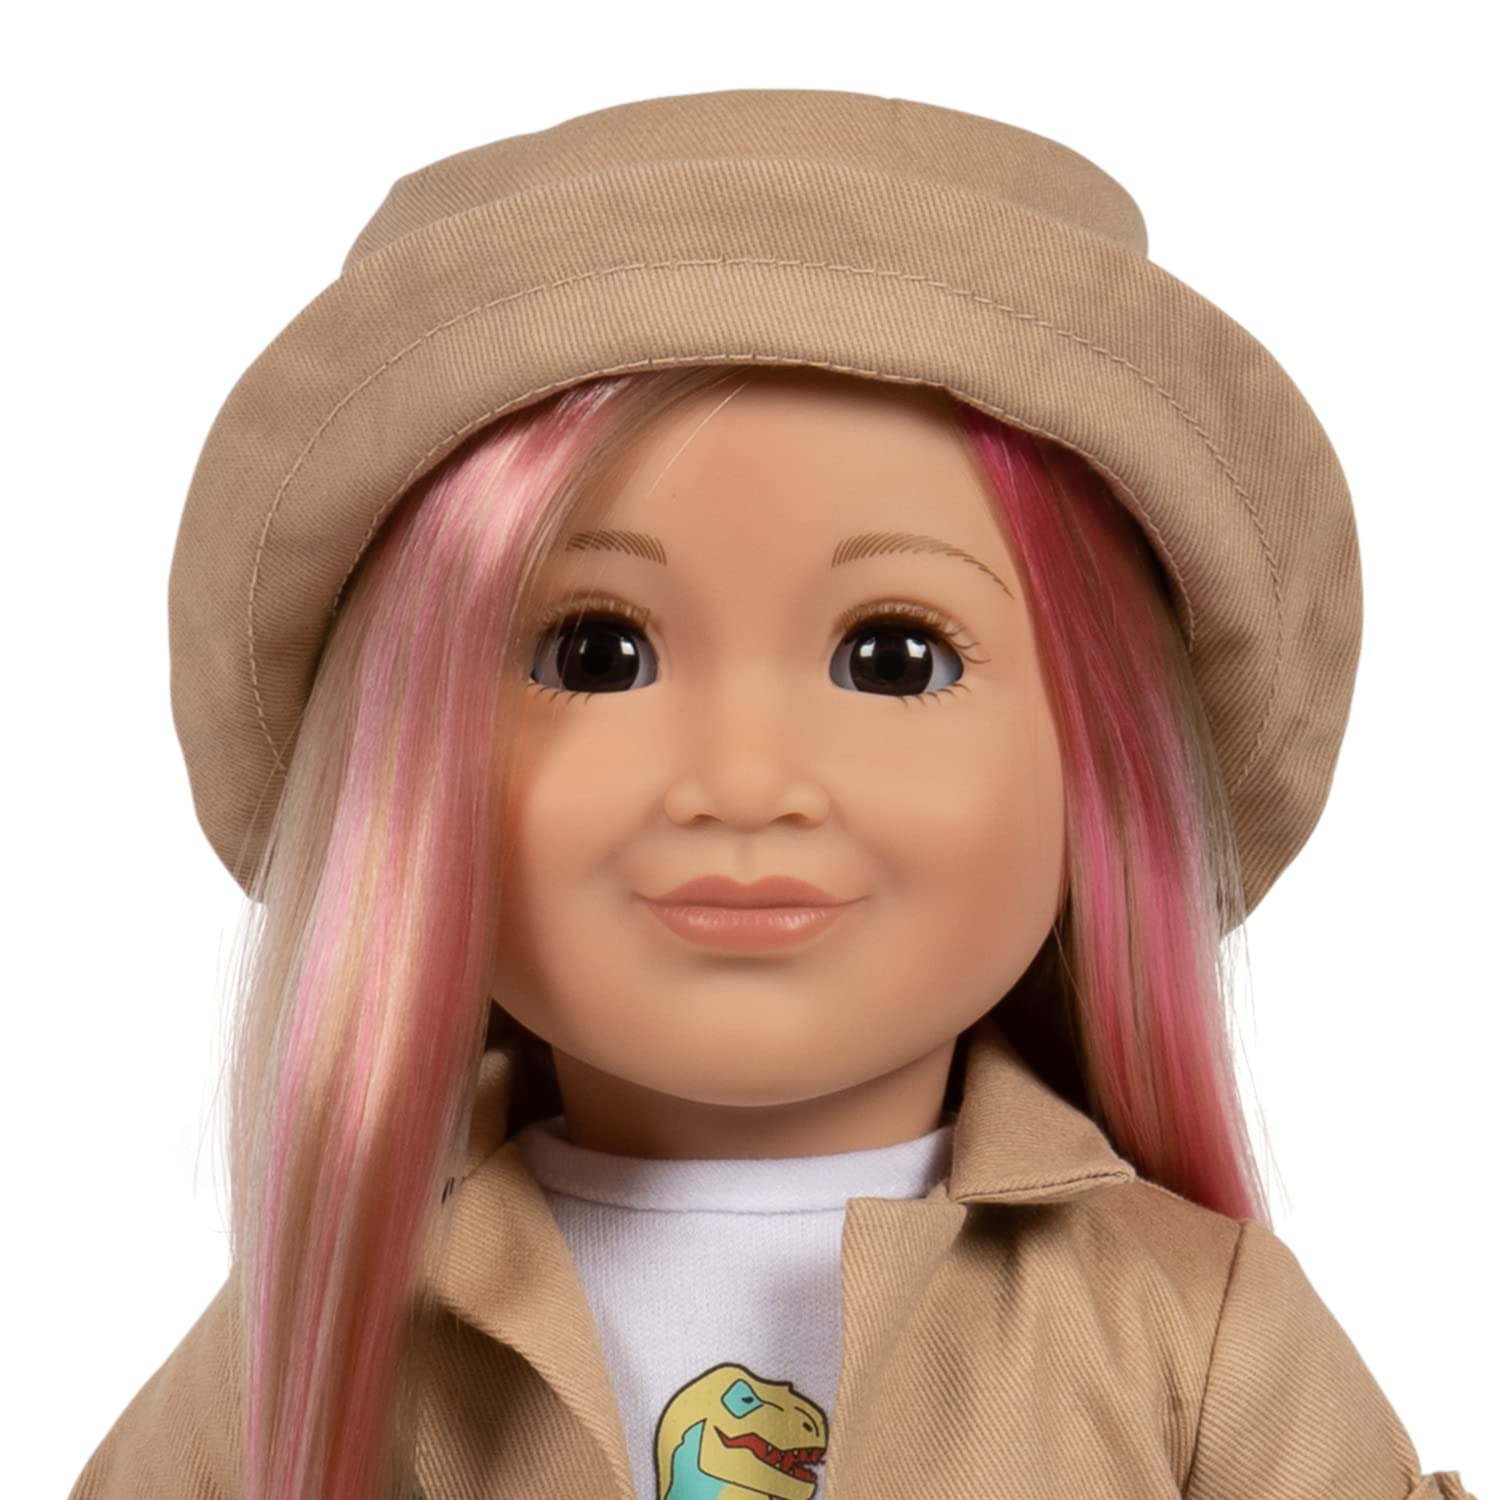 Adora Amazing Girls 18 Doll, Dino Lucy with Safari Outfit (Amazon Exclusive)